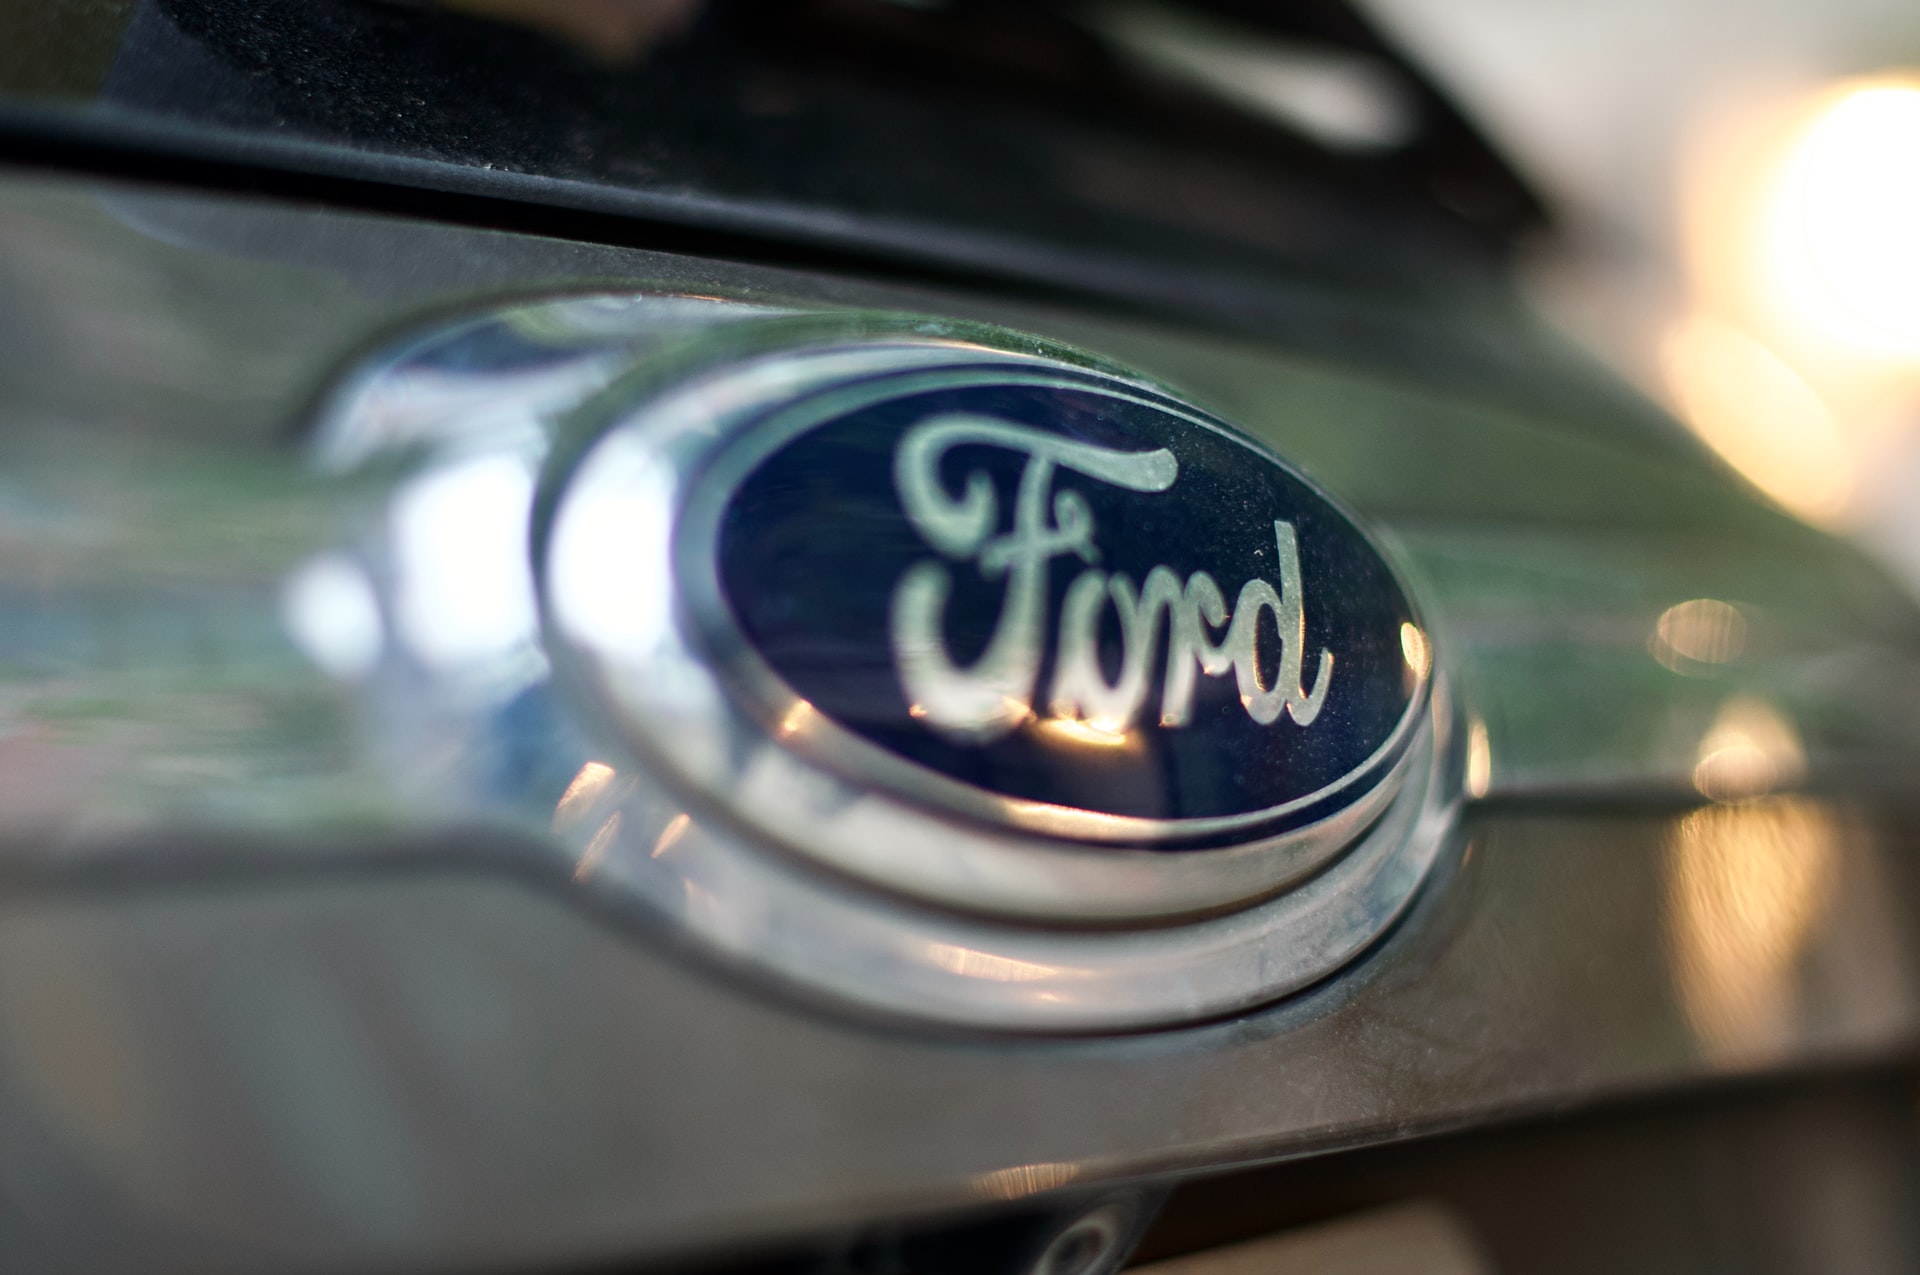 Ford badge on a front of the vehicle, close up photo